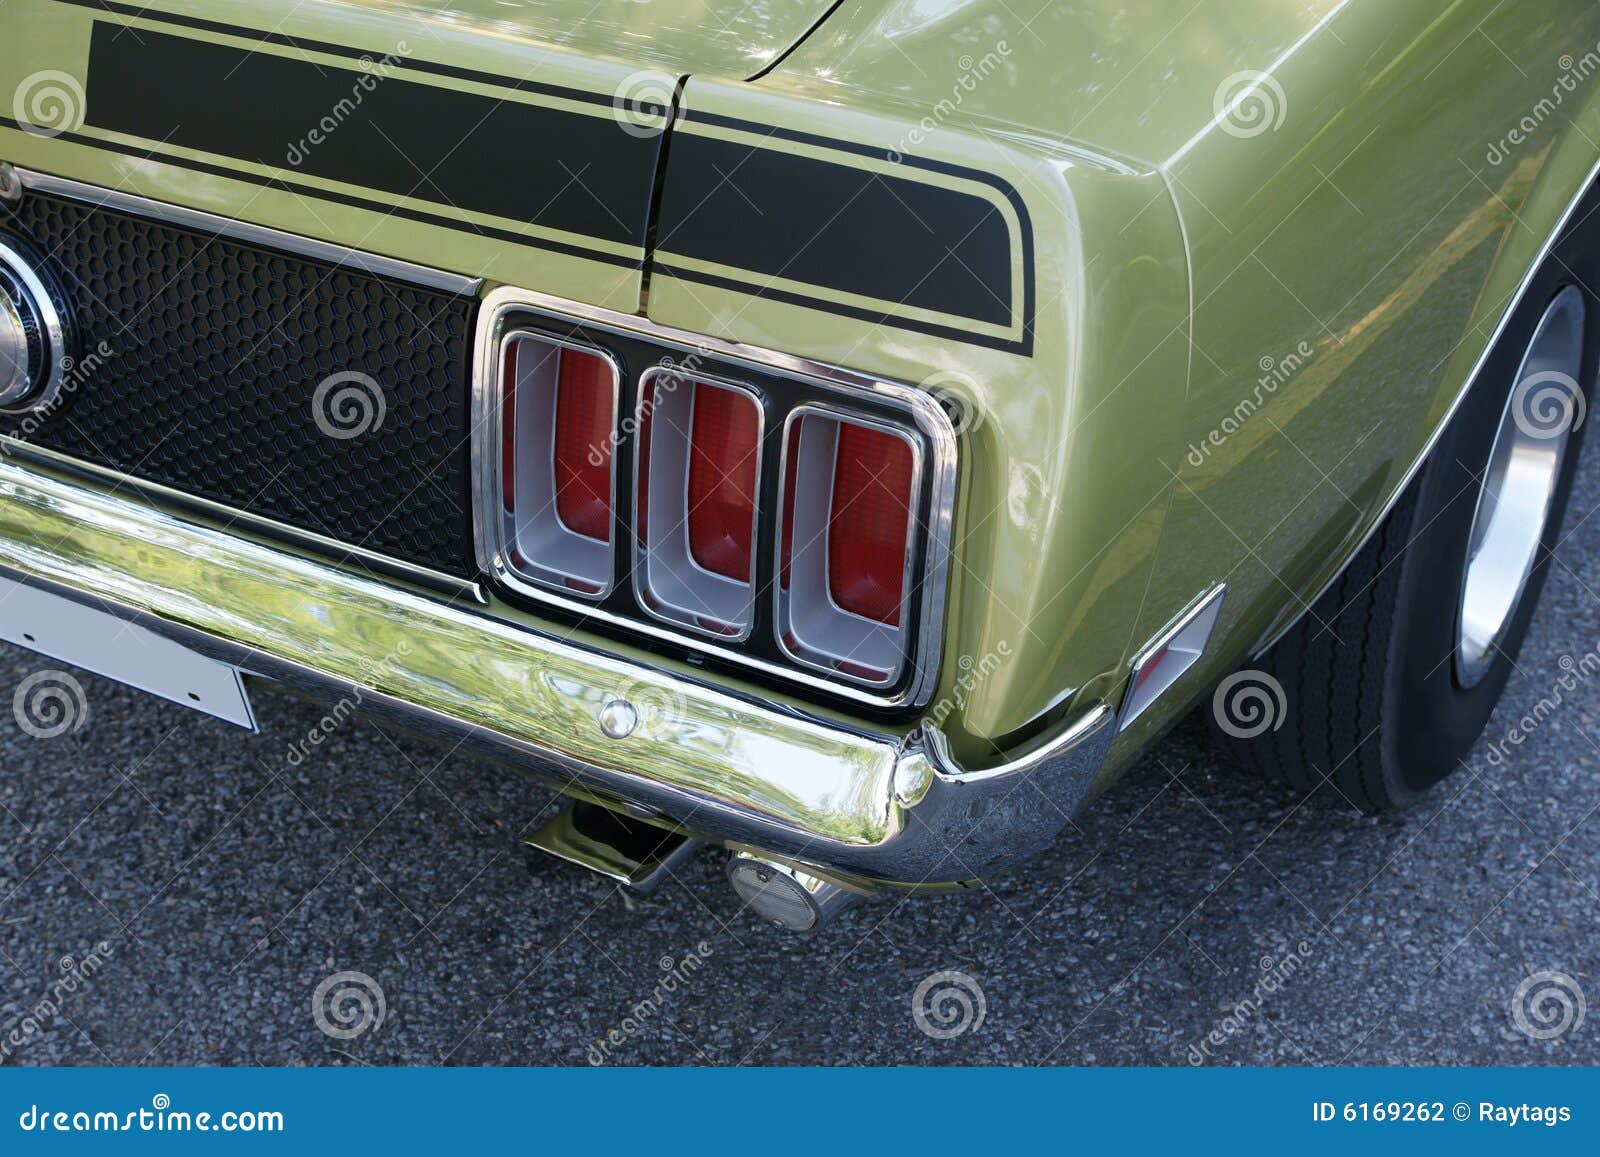 Mustang Mach1 Rear End Stock Photo Image Of Collage Fastback 6169262